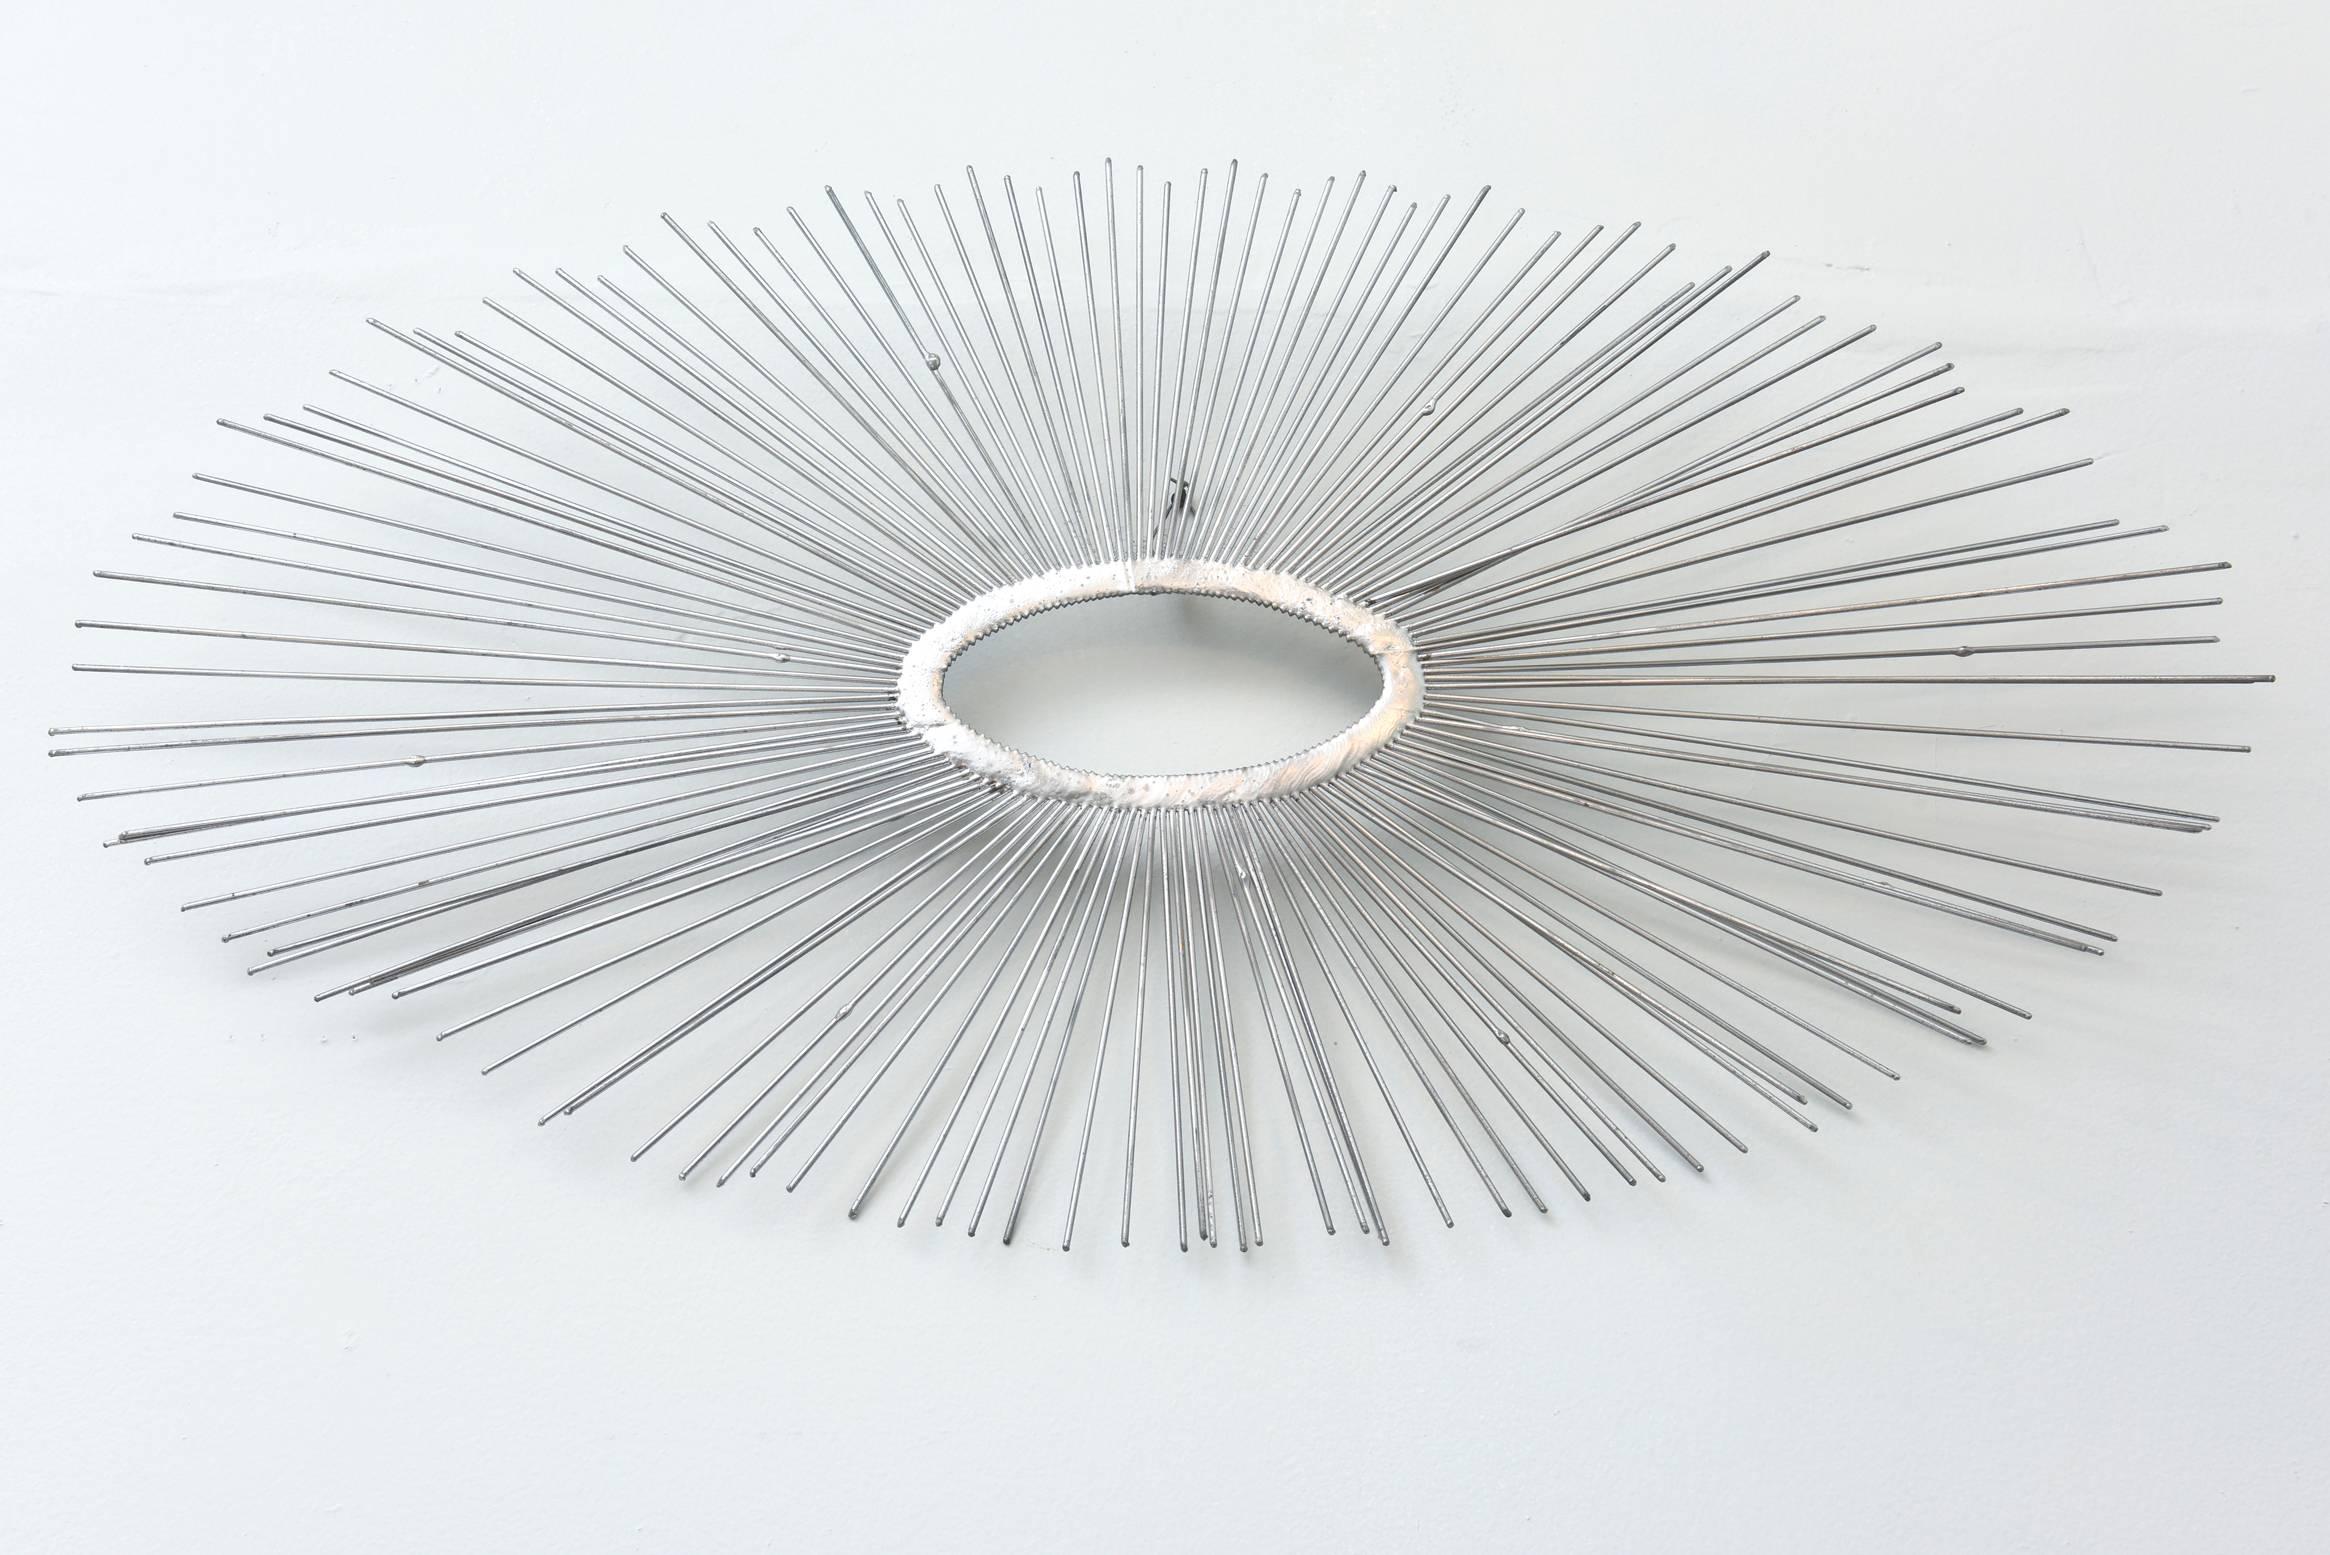 American Modern Wall-Mounted Sunburst Sculpture, Curtis Jere, 1970's For Sale 2